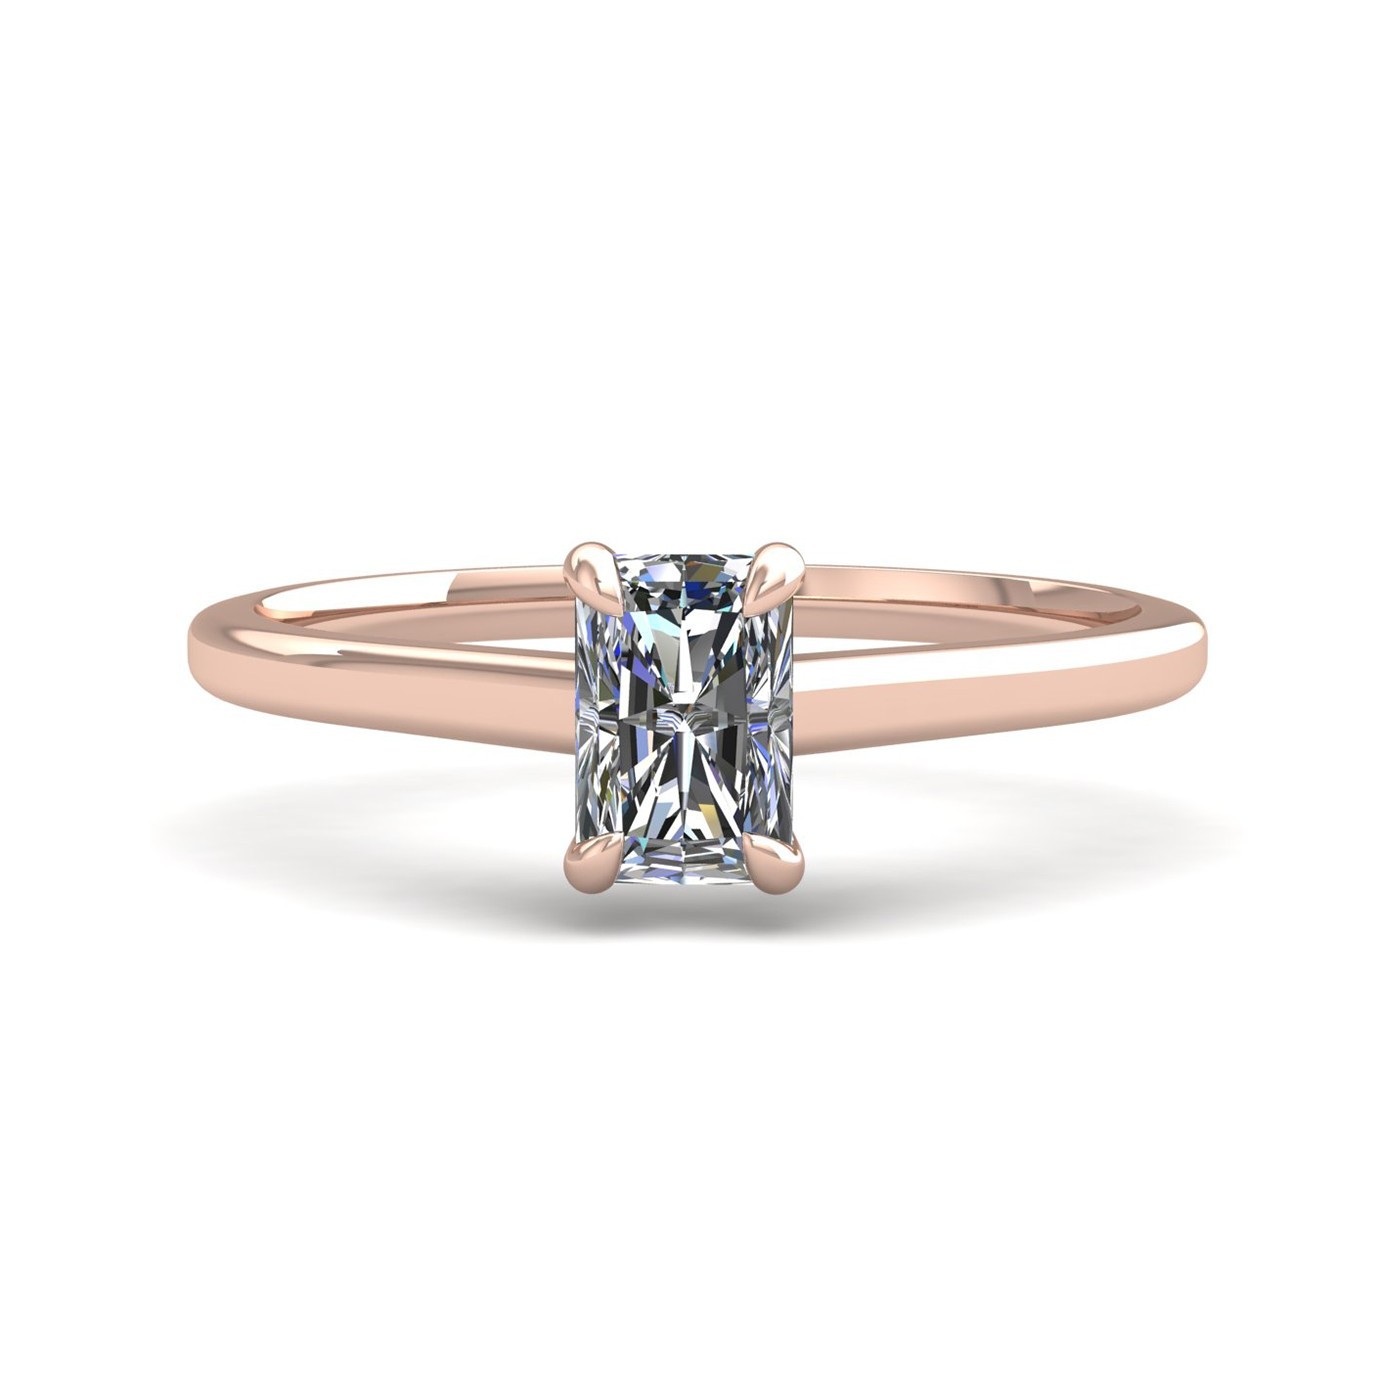 18k rose gold  1,20 ct 4 prongs solitaire radiant cut diamond engagement ring with whisper thin band Photos & images